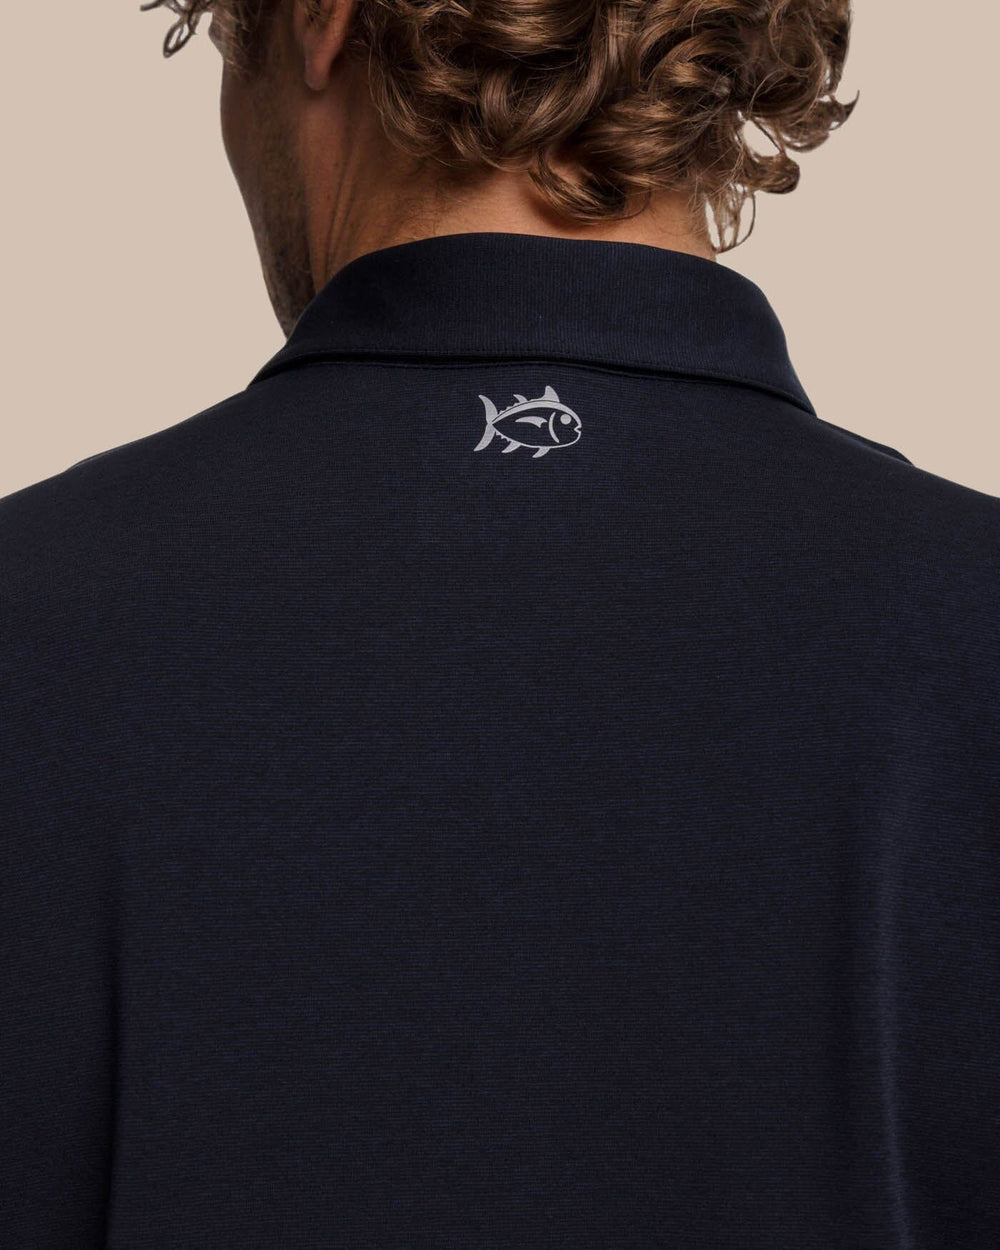 The yoke view of the Southern Tide brrr-eeze Heather Performance Polo Shirt by Southern Tide - Heather Caviar Black